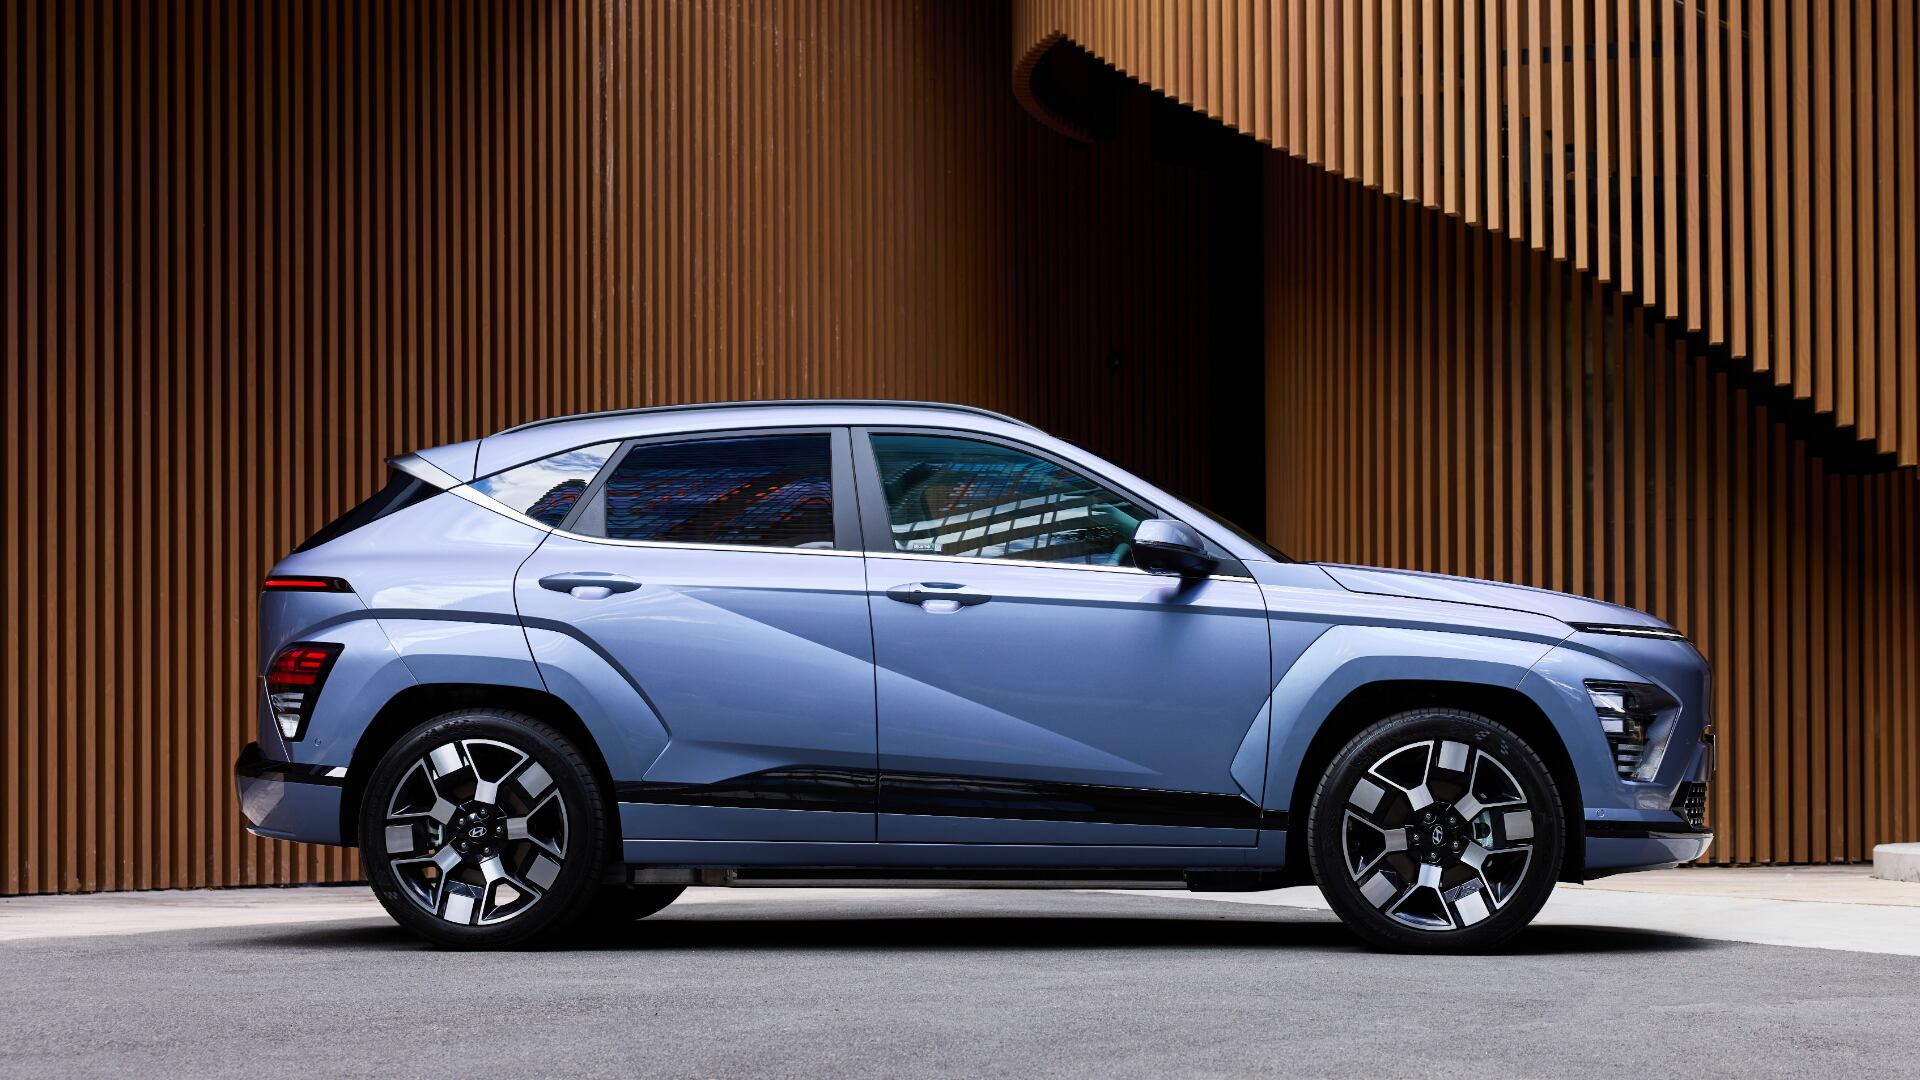 Hyundai Kona in side view parked modern building background